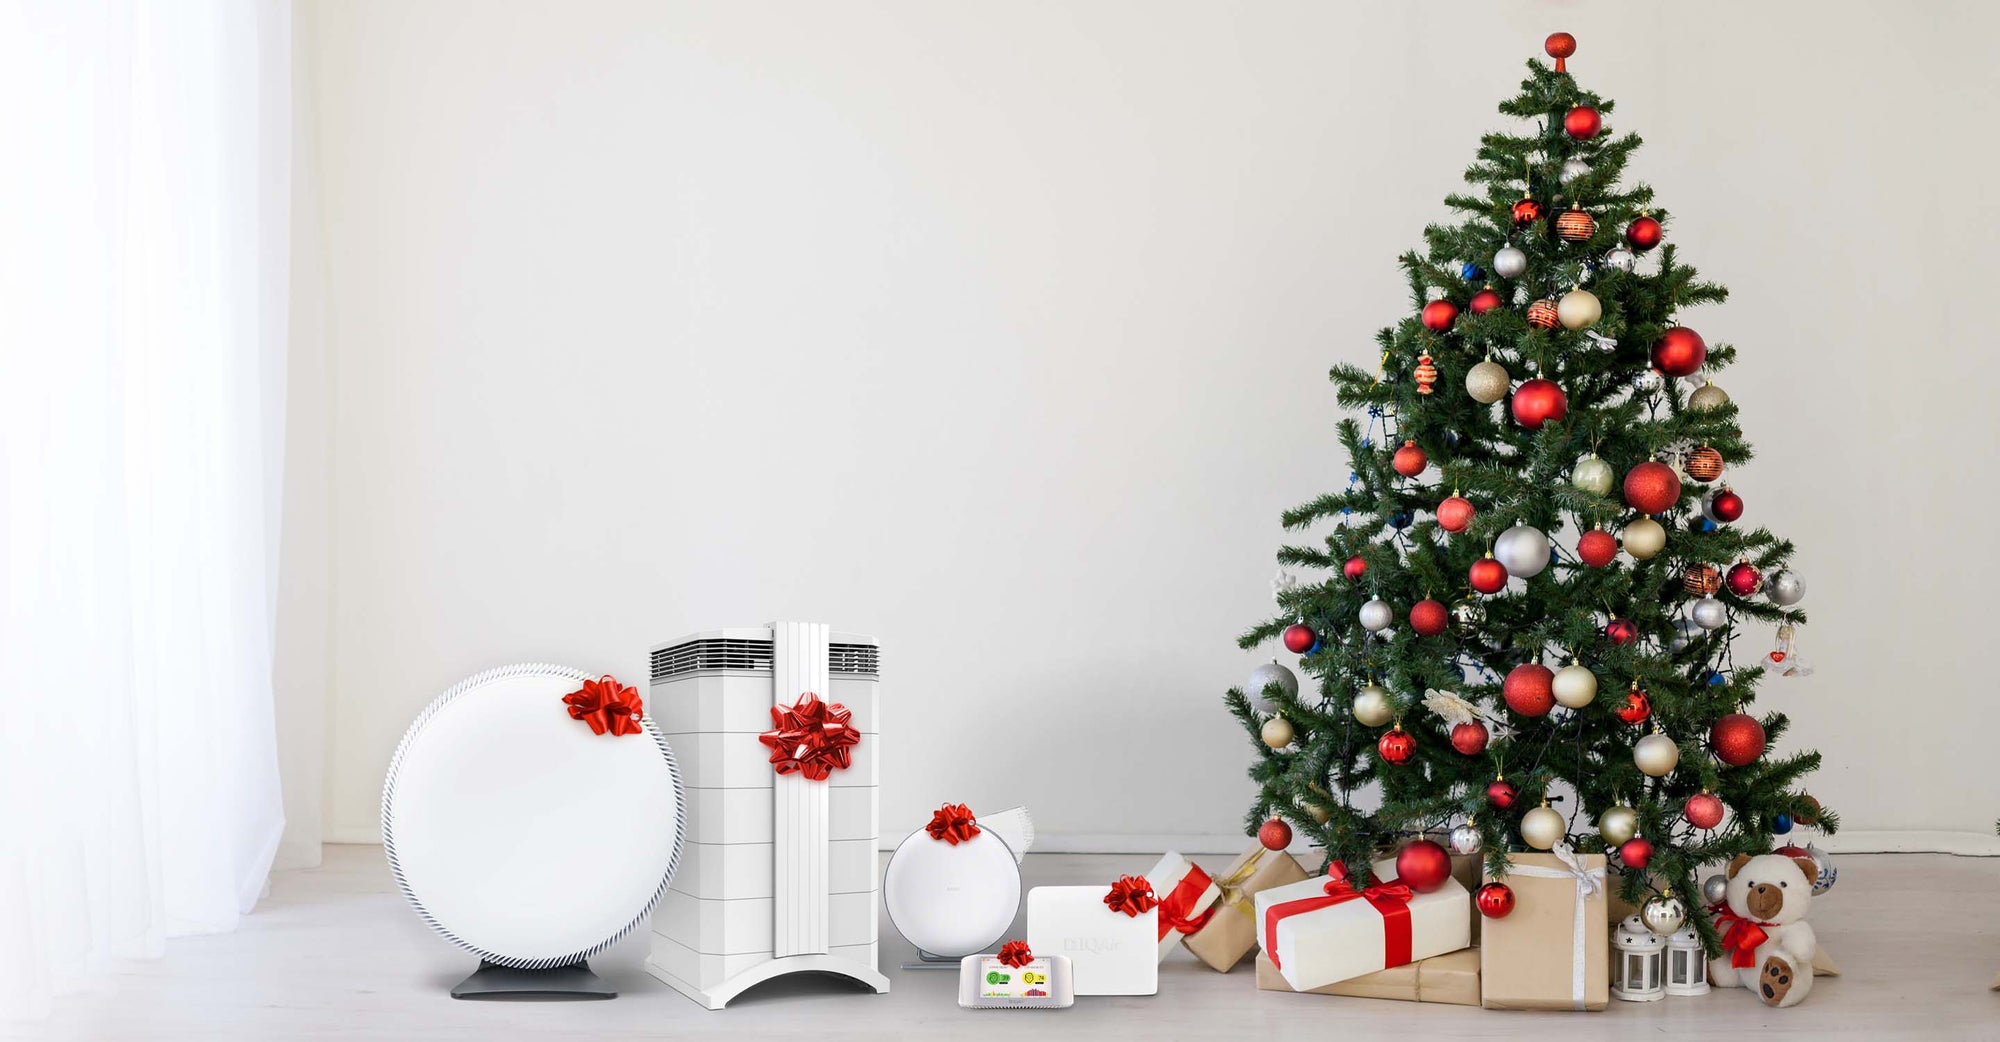 Air purifiers with bows next to Christmas tree